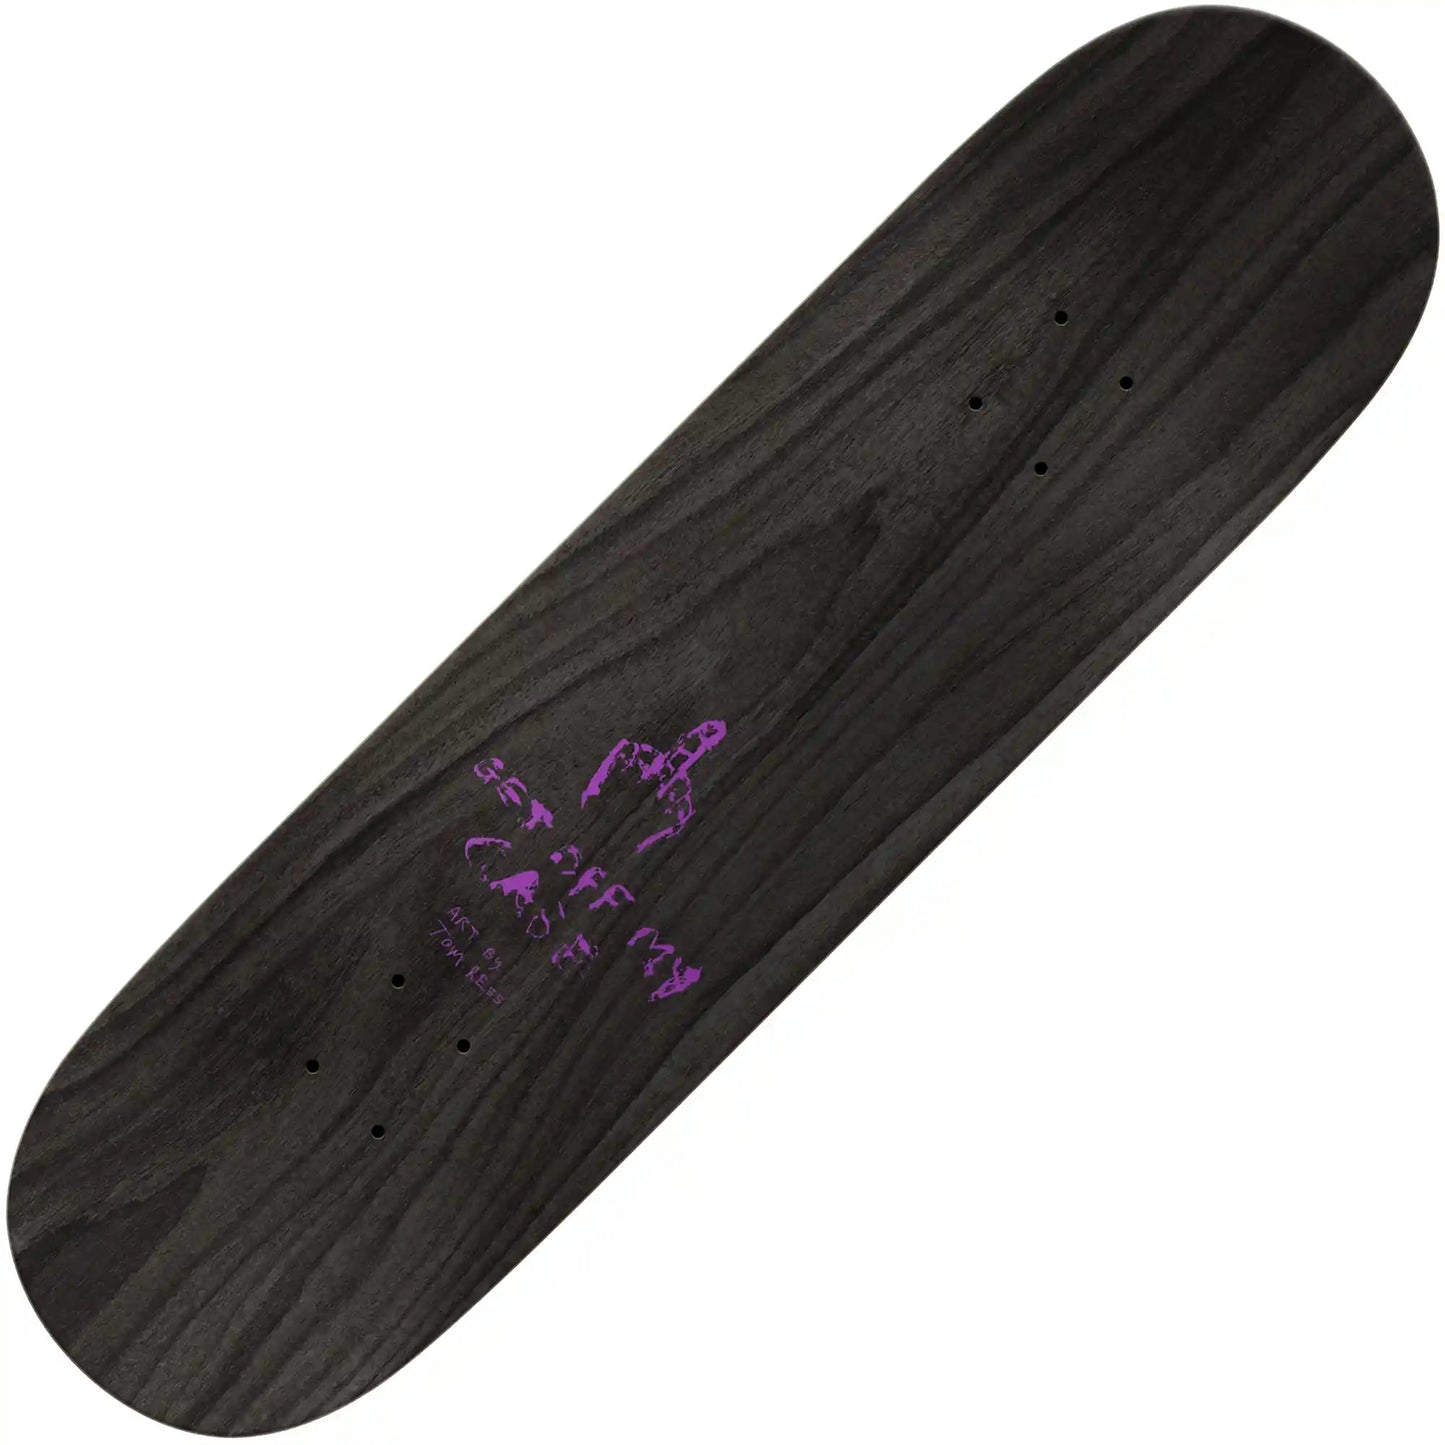 There Cher Get Off My Case True Fit (8.25"), brown - Tiki Room Skateboards - 2